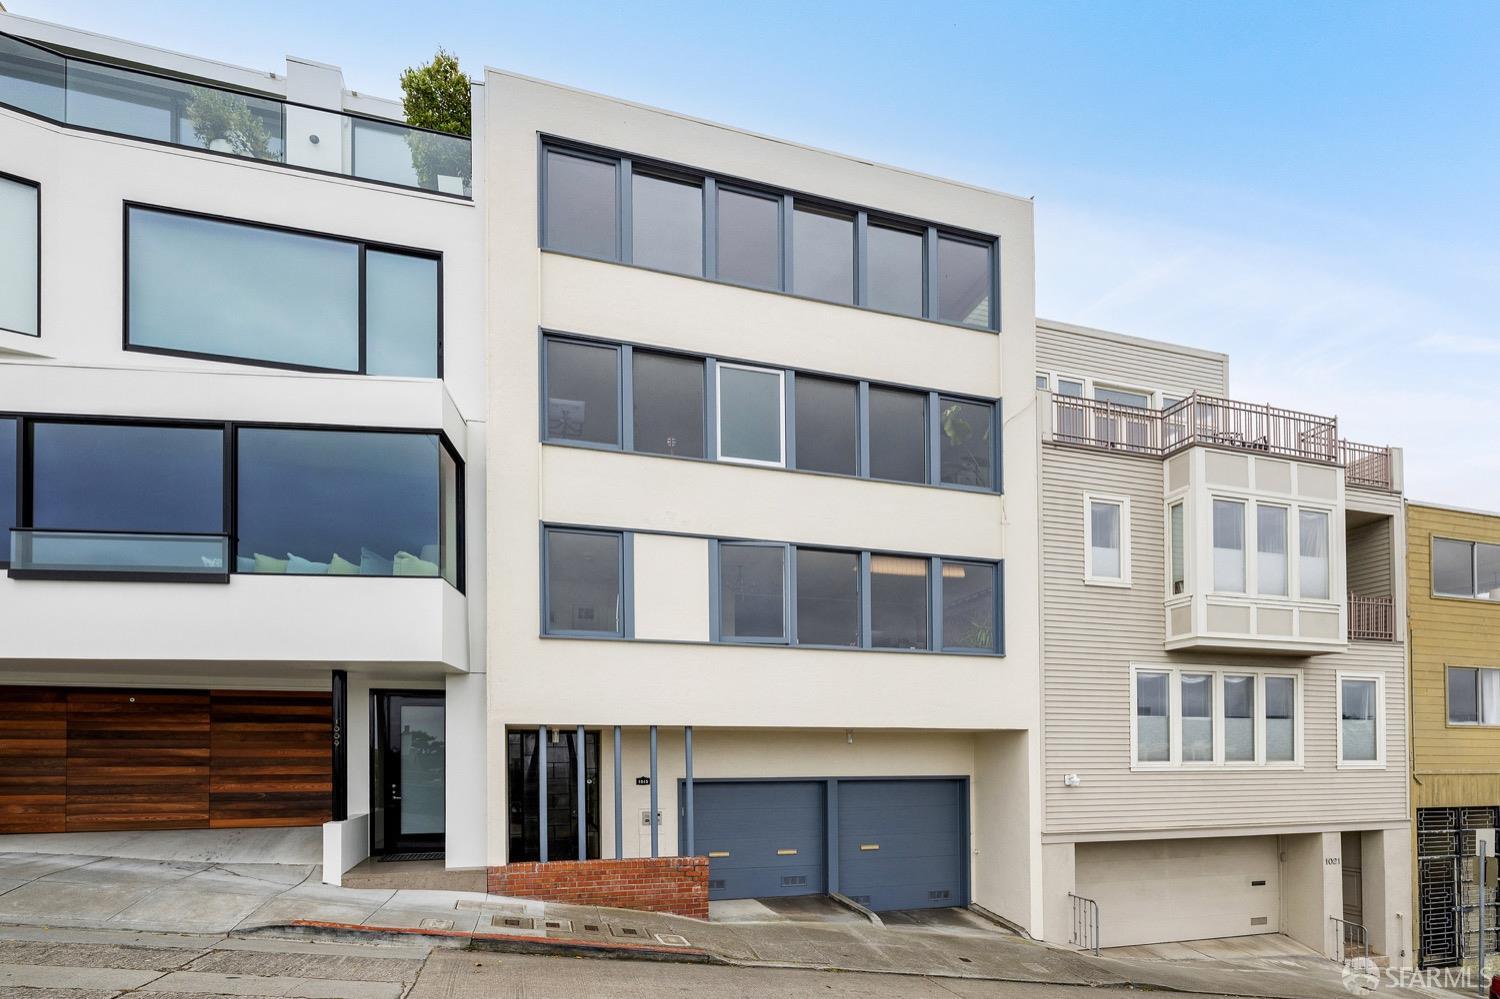 An iconic Russian Hill trophy building on Francisco St at the curve. All units feature magnificent northern views of the Golden Gate Bridge, Alcatraz and Angle Island. This 3-unit building consists of two 1-bedroom units and a huge 2-level owners unit. The first residence offers 1 bedroom, 1 bathroom, an office, storage, and an independent garage. The middle residence with 1 bedroom and 1 bathroom offers a larger layout for entertaining at over 1,000 sq.ft. of living space and includes storage with an independent garage. The top level owner's residence offers 3 bedrooms and 2 full bathrooms, one of which is en suite. The additional level is an expansive family room which opens onto the rear garden. The 2 garages for this unit are accessed through the alley above the property from Larkin St and are also independent. The rooftop features a panoramic view deck.     NOTE: Photos are digitally modified/staged.